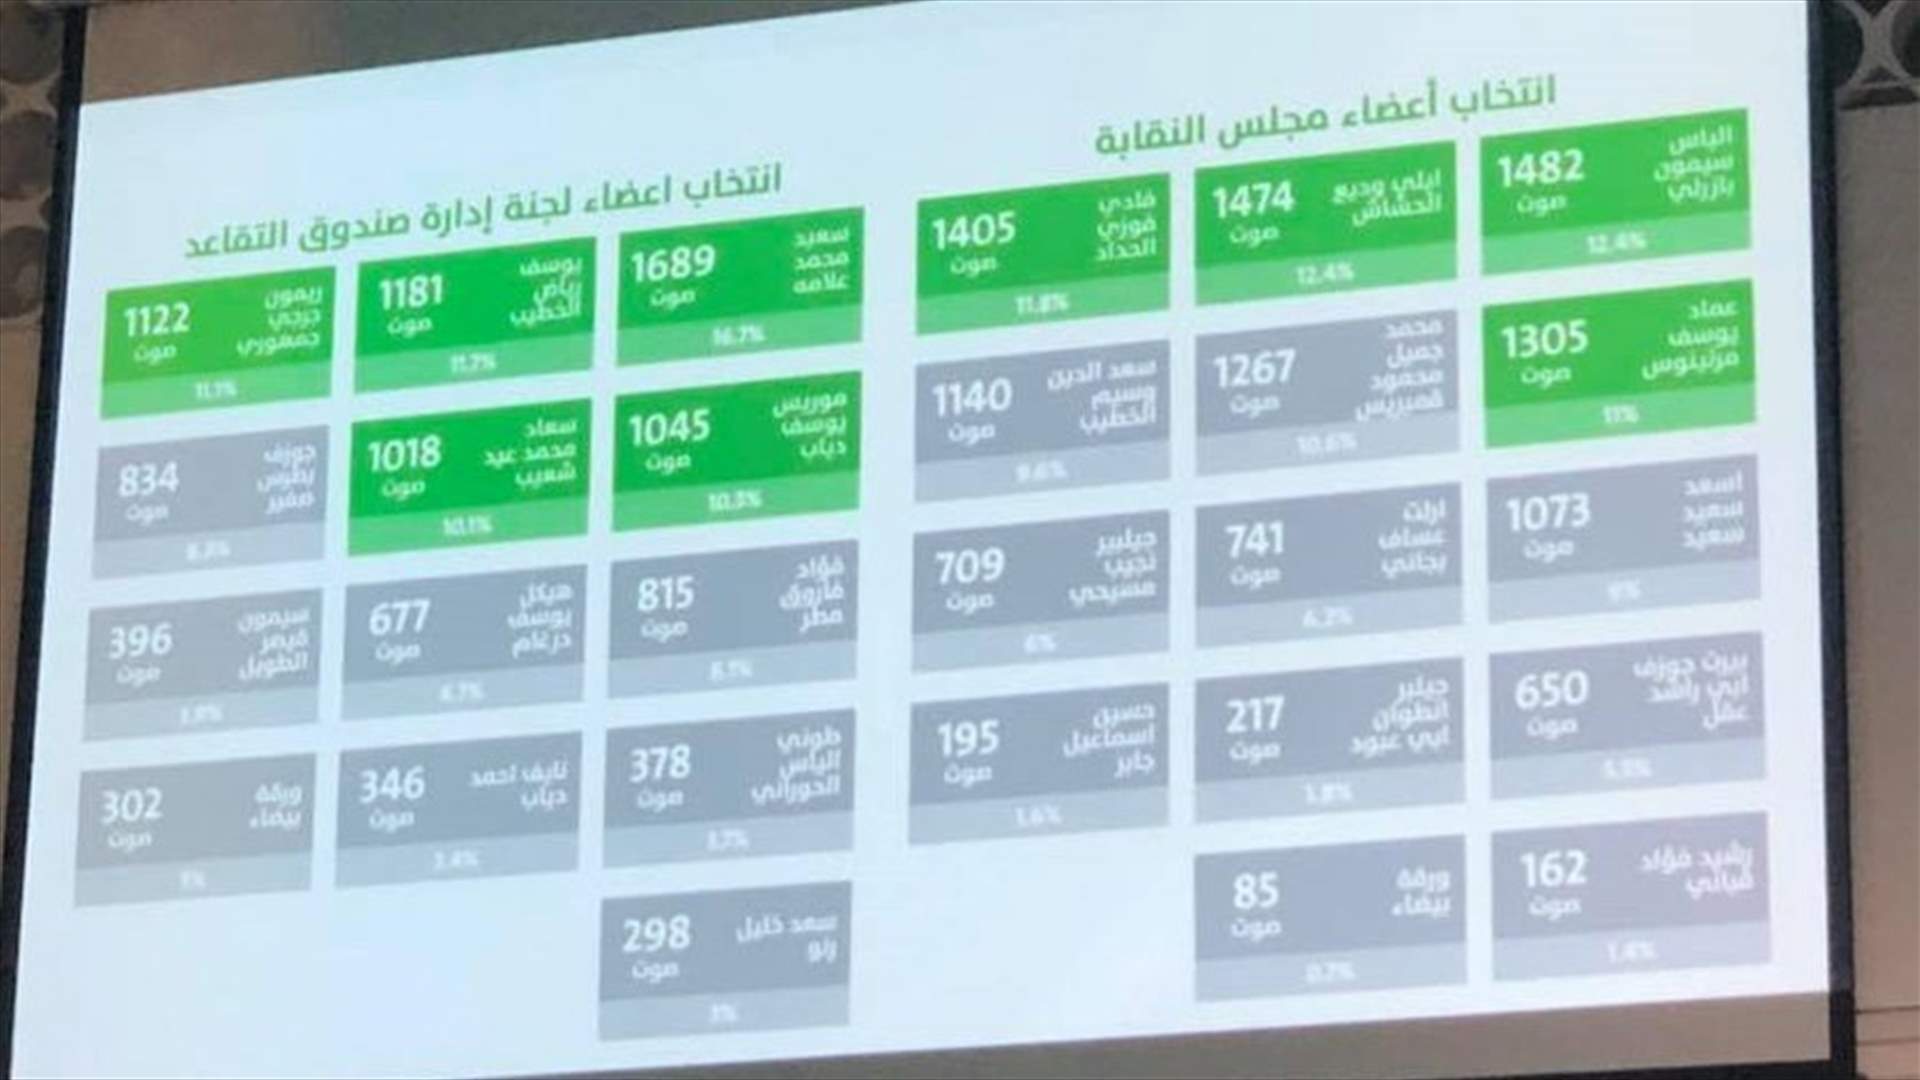 Results of Beirut Bar Association elections are out